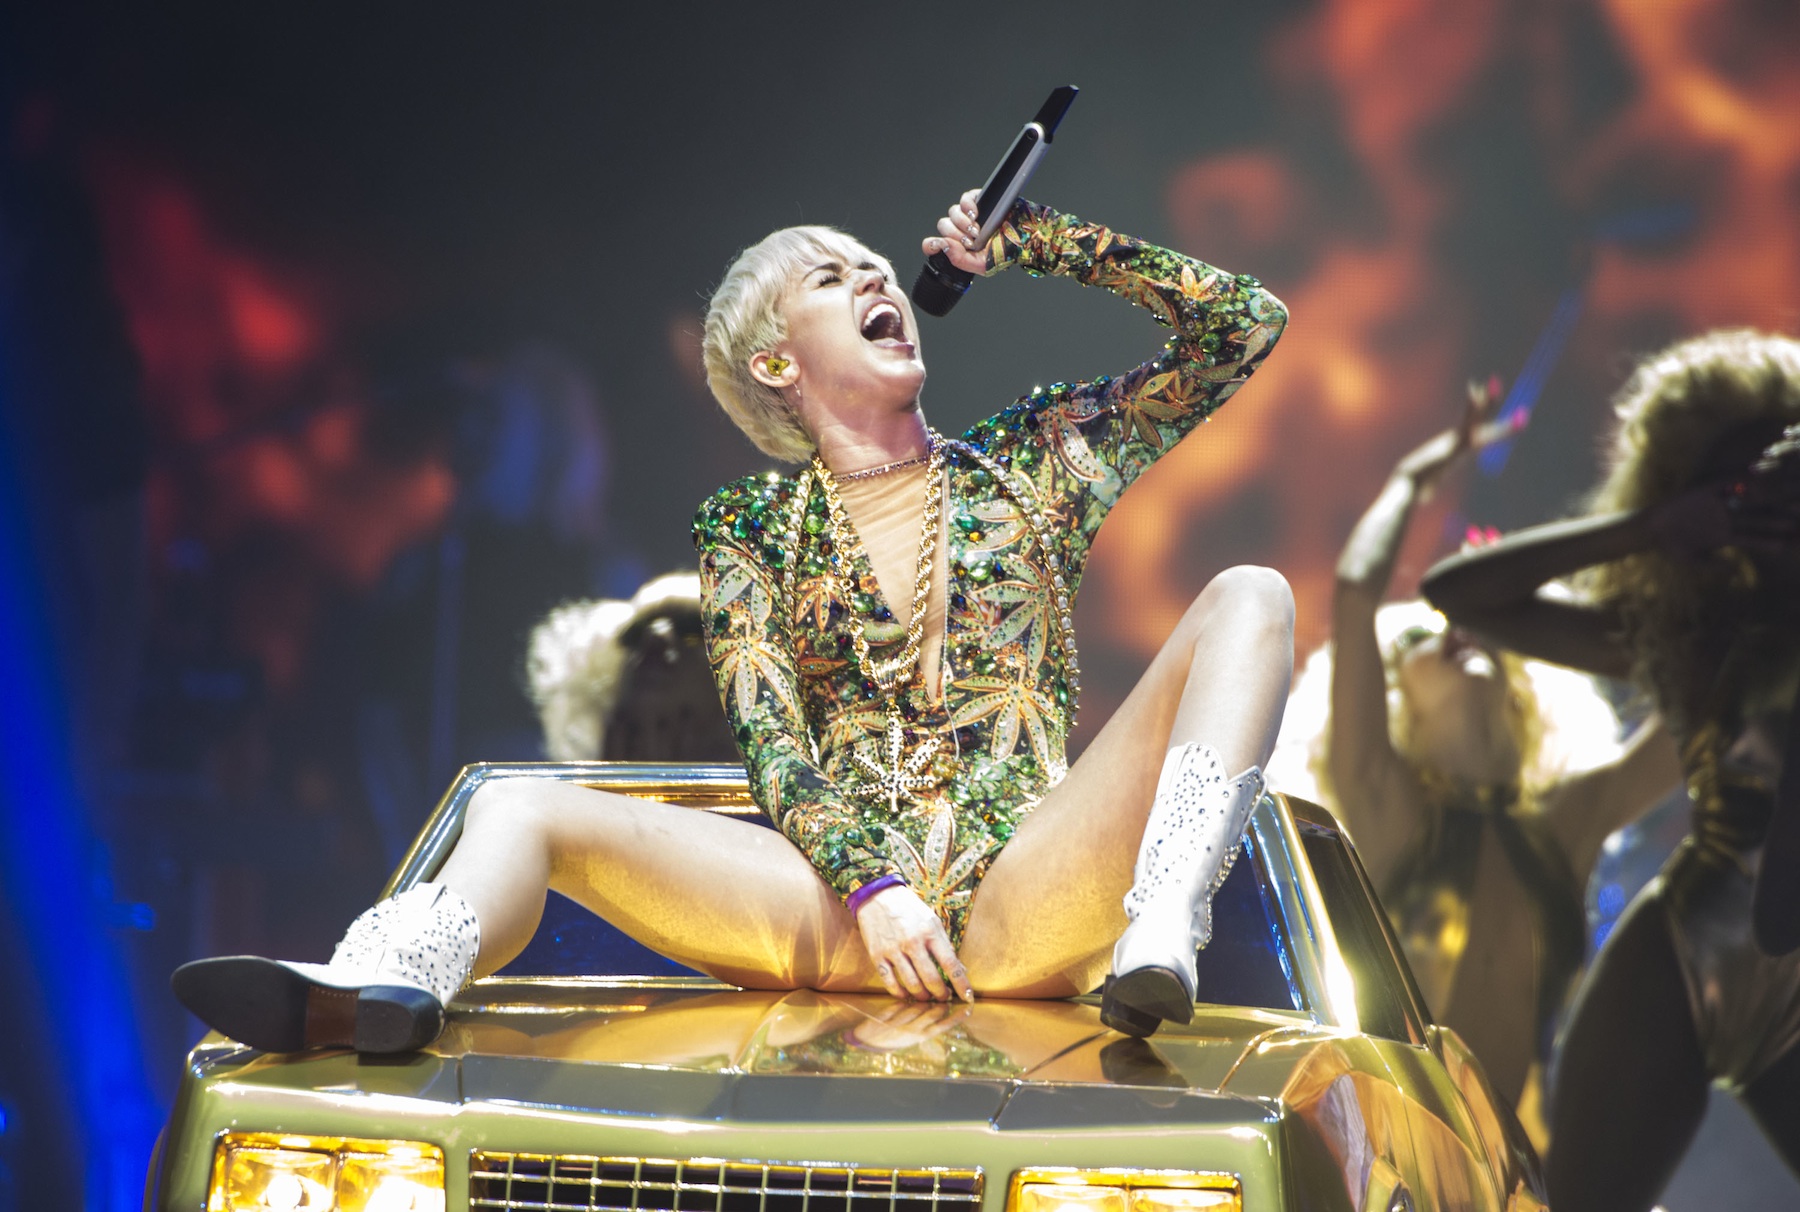 benz gonzales recommends miley cyrus dirty pics pic